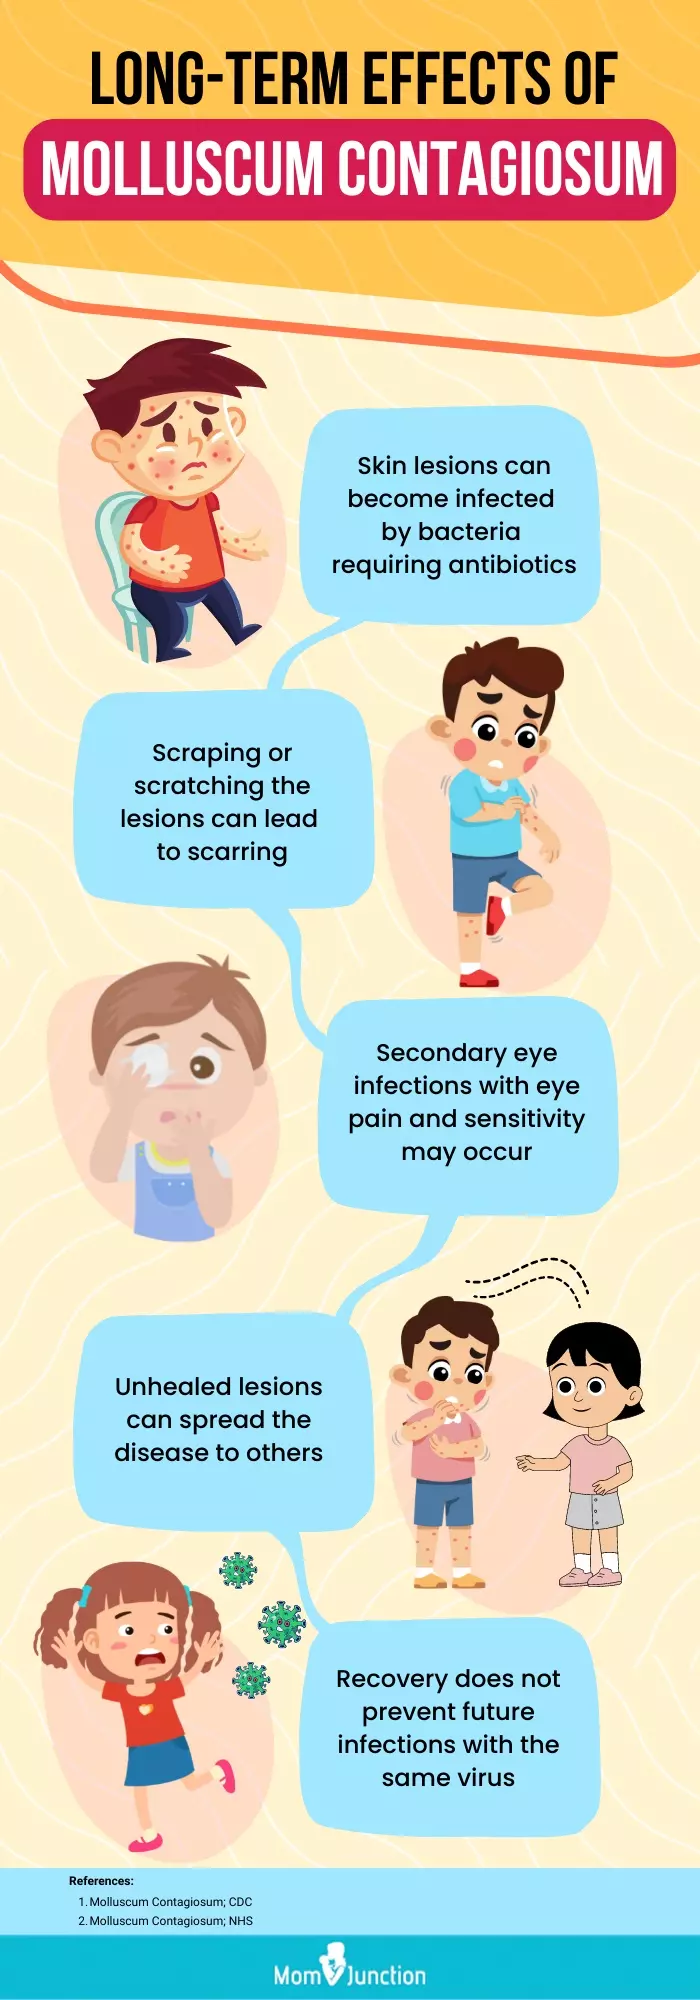 long-term effects of molluscum contagiosum (infographic)